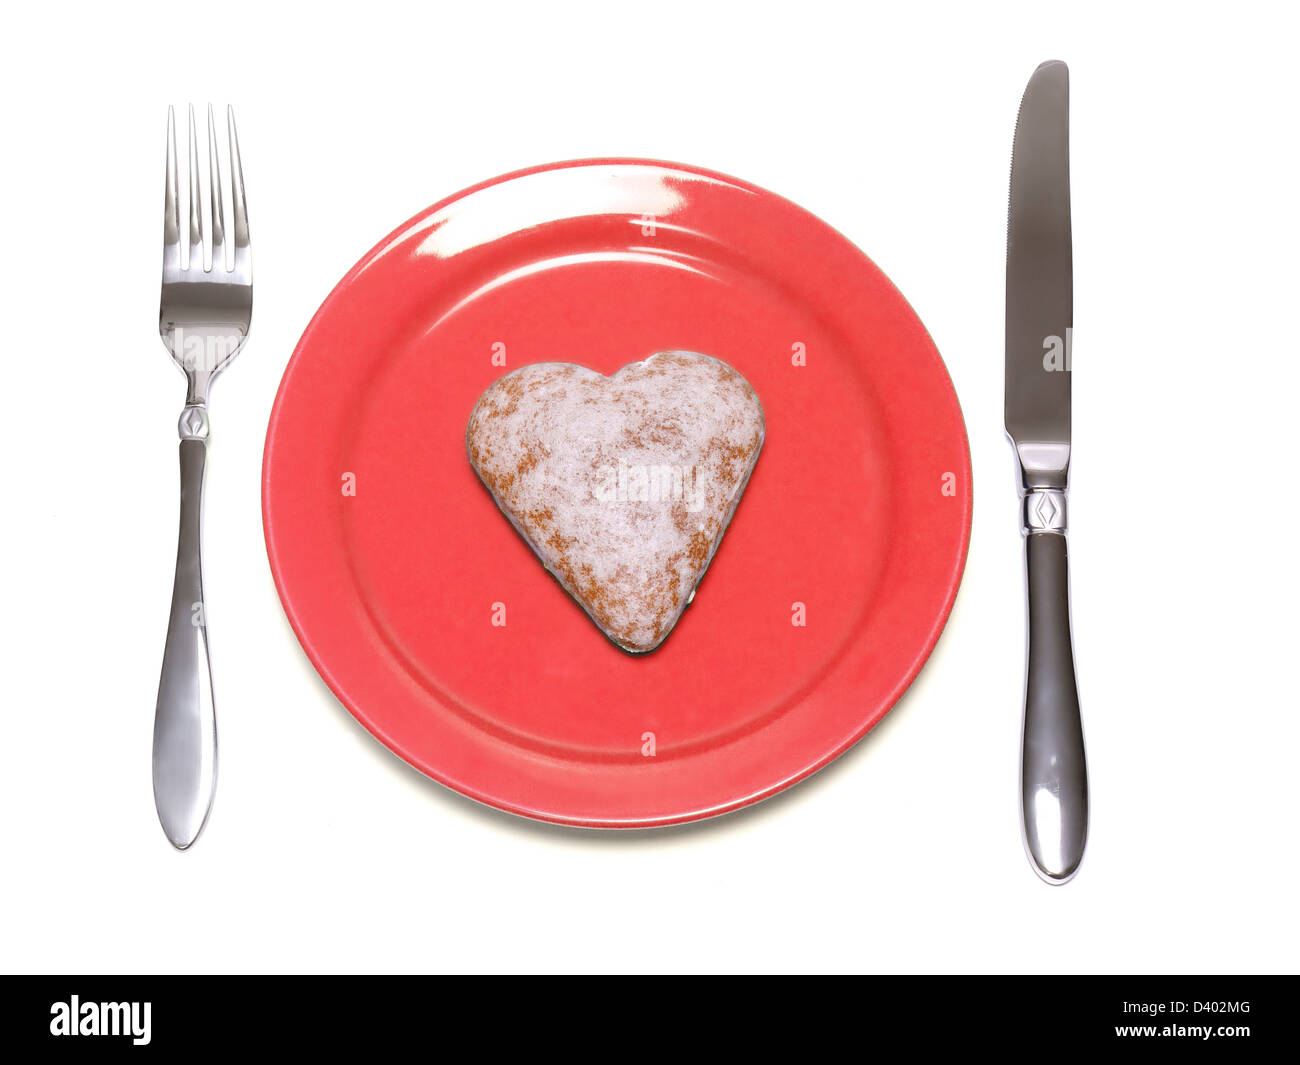 Heart-shaped gingerbread cake on red plate with fork and knife over white background Stock Photo